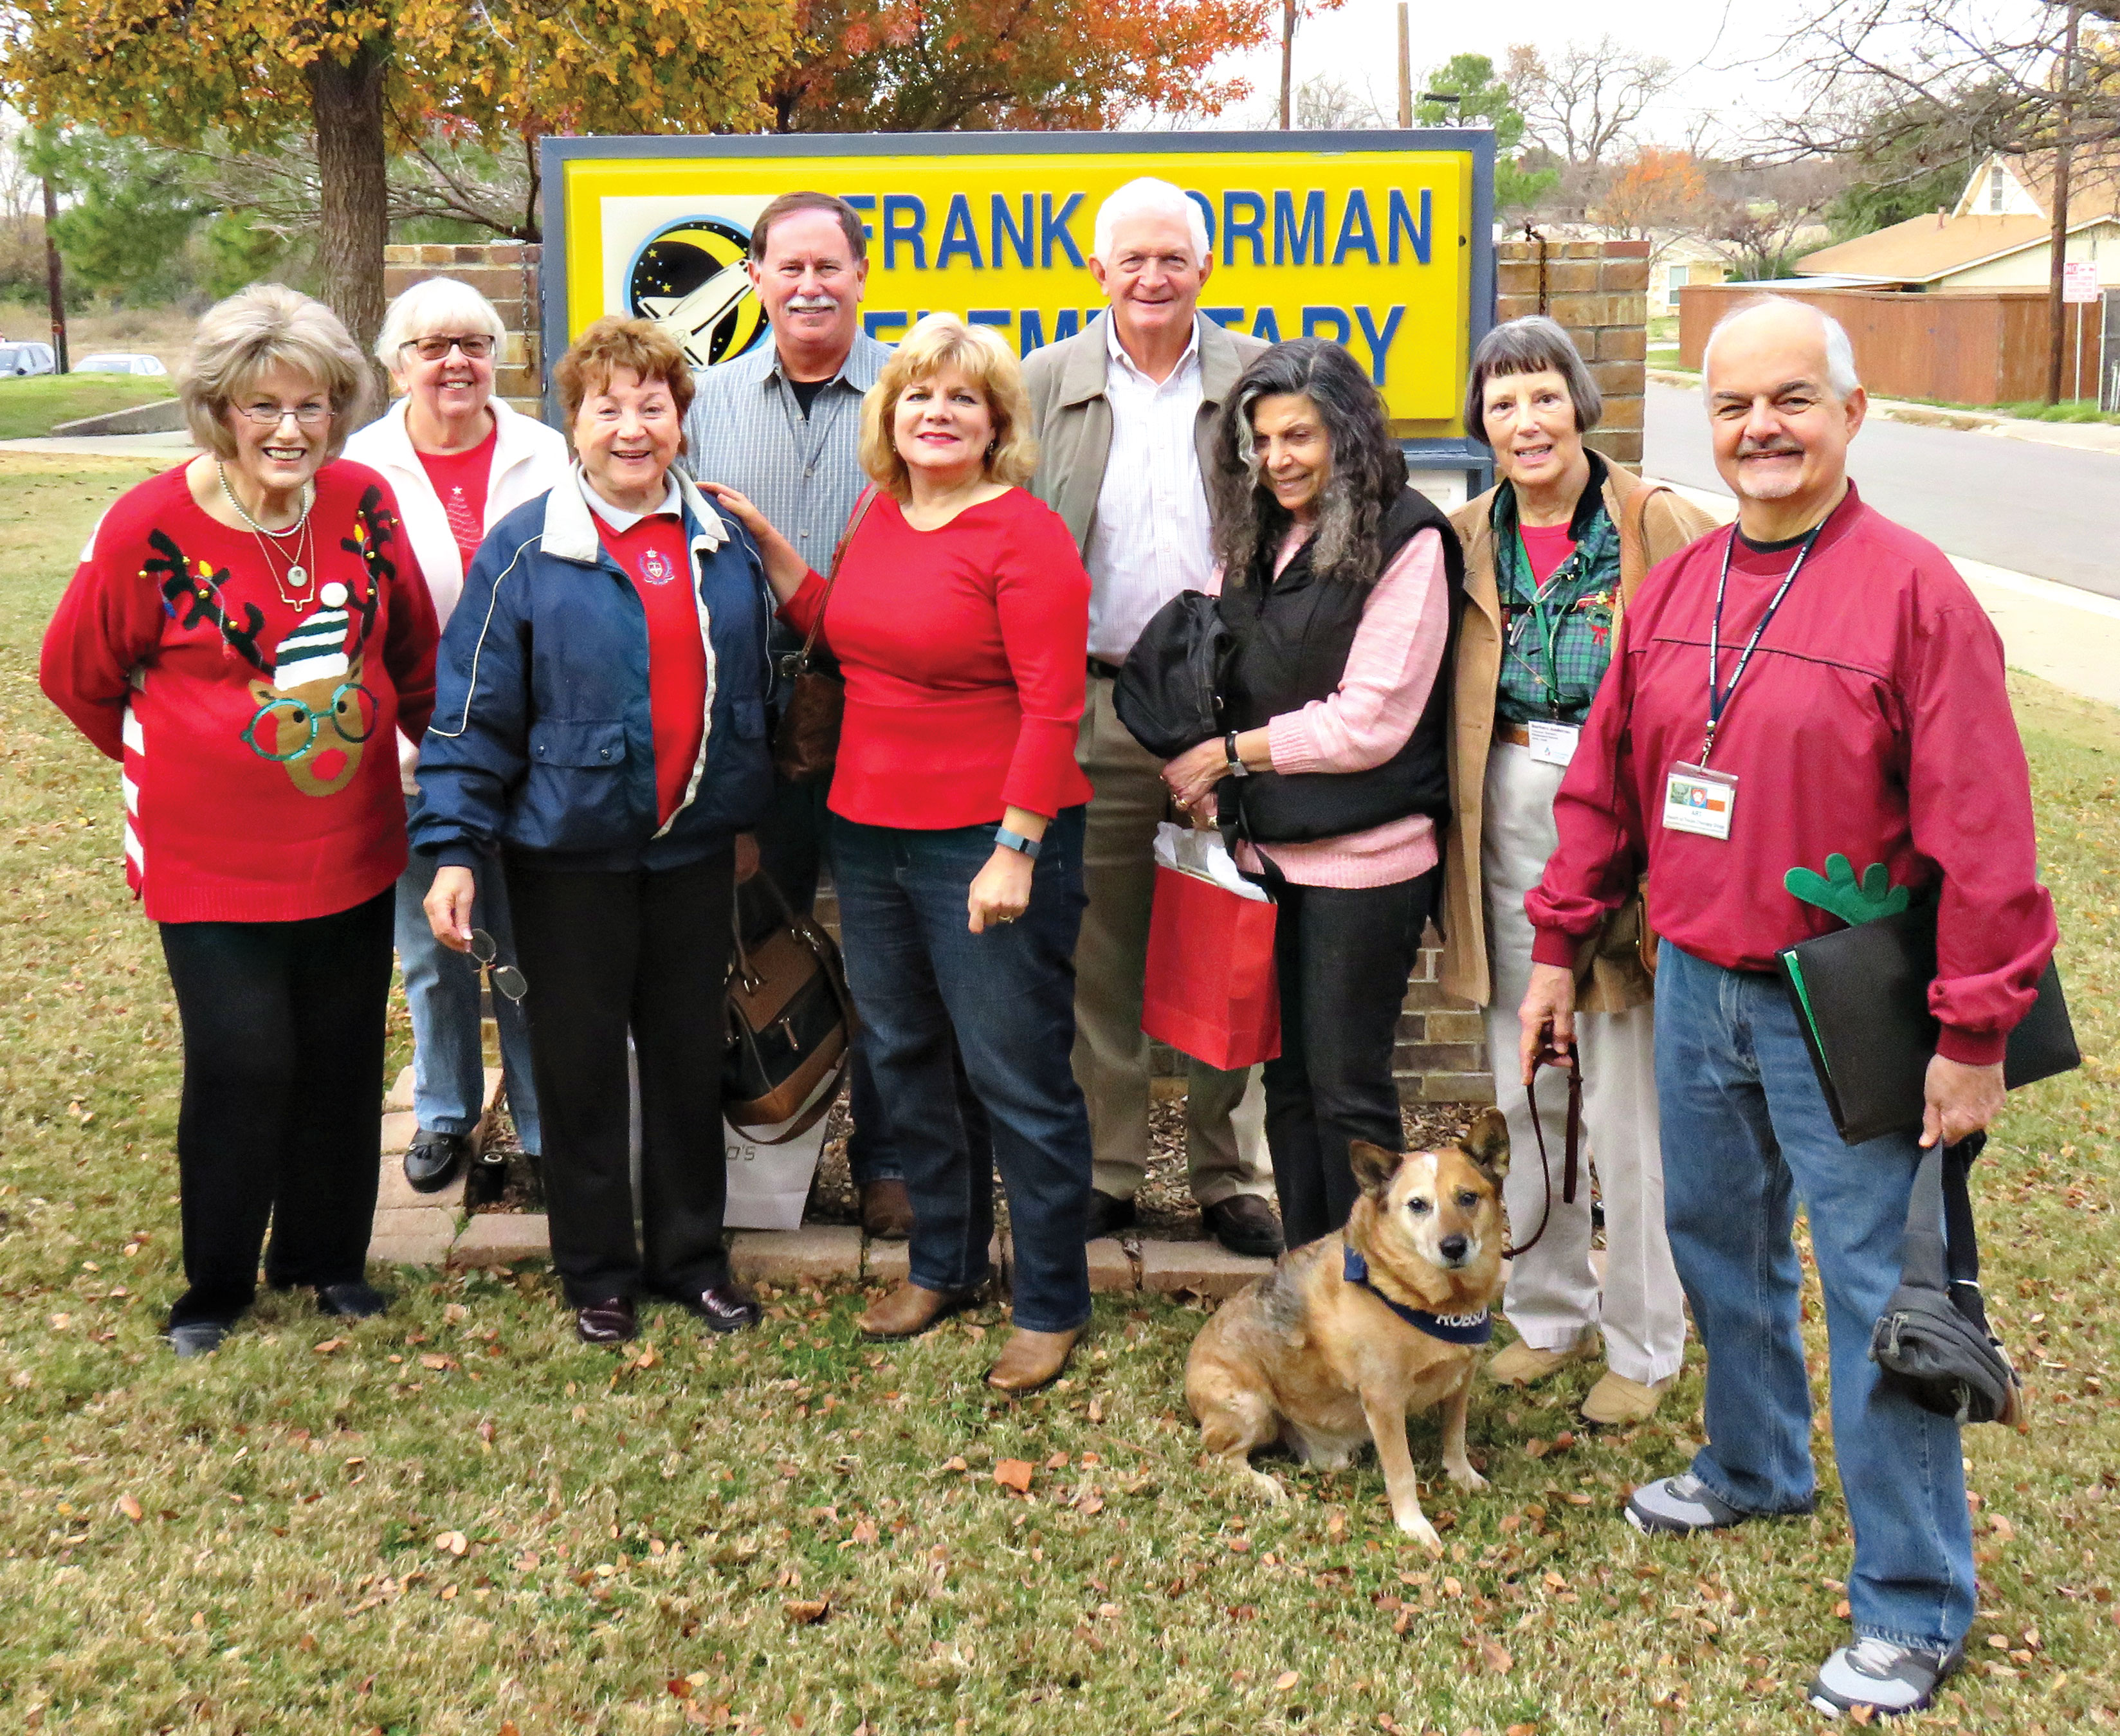 A few of the many volunteers at Borman Elementary including Cody the dog.